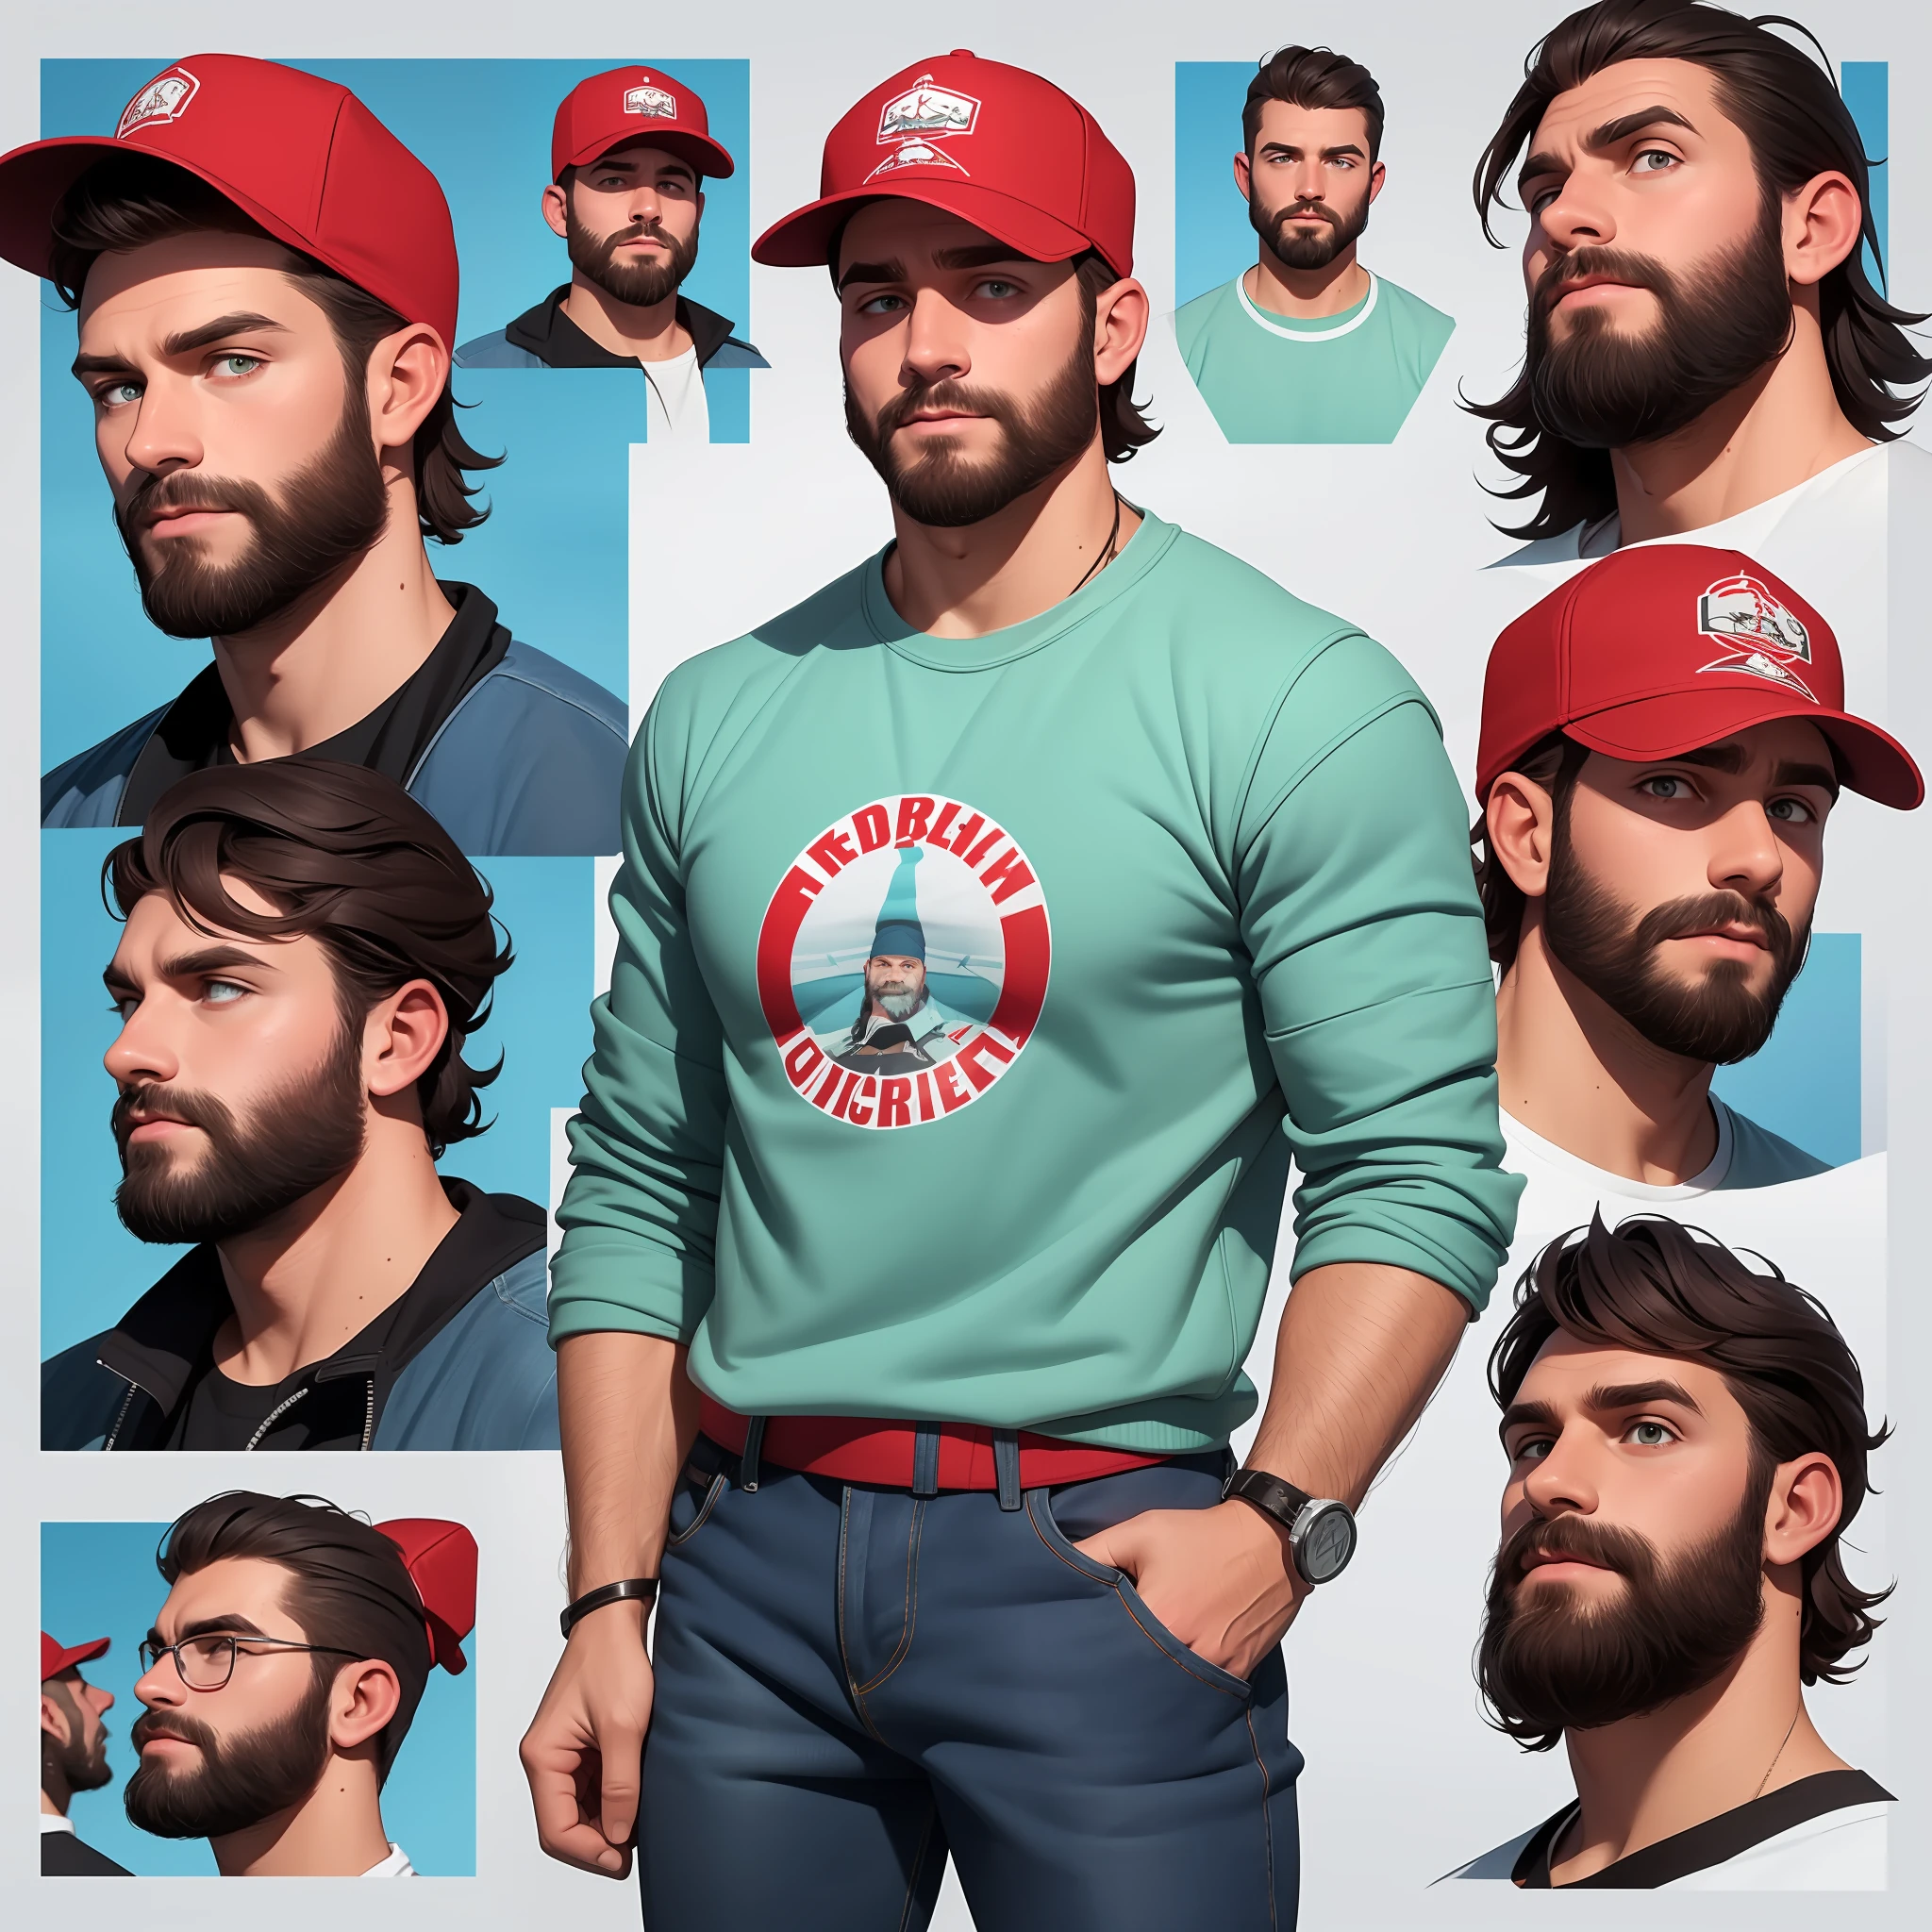 character sheet, white male with very curly short hair and beard, red baseball cap, black and red utility jacket, motorist, high quality, handsome, light blue bootcut jeans, mild body hair, messy look, rugged, different facial expressions, full body, white undershirt, white socks, loose clothing,